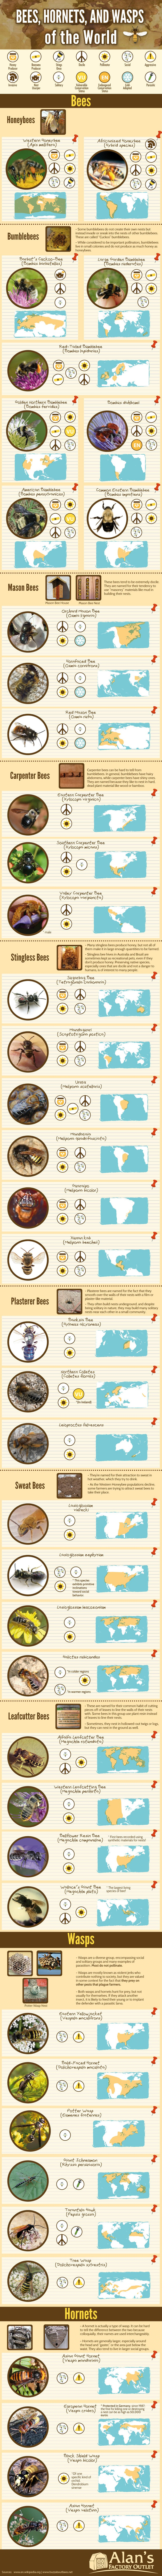 1222-bees-wasps-hornets-of-the-world.jpeg